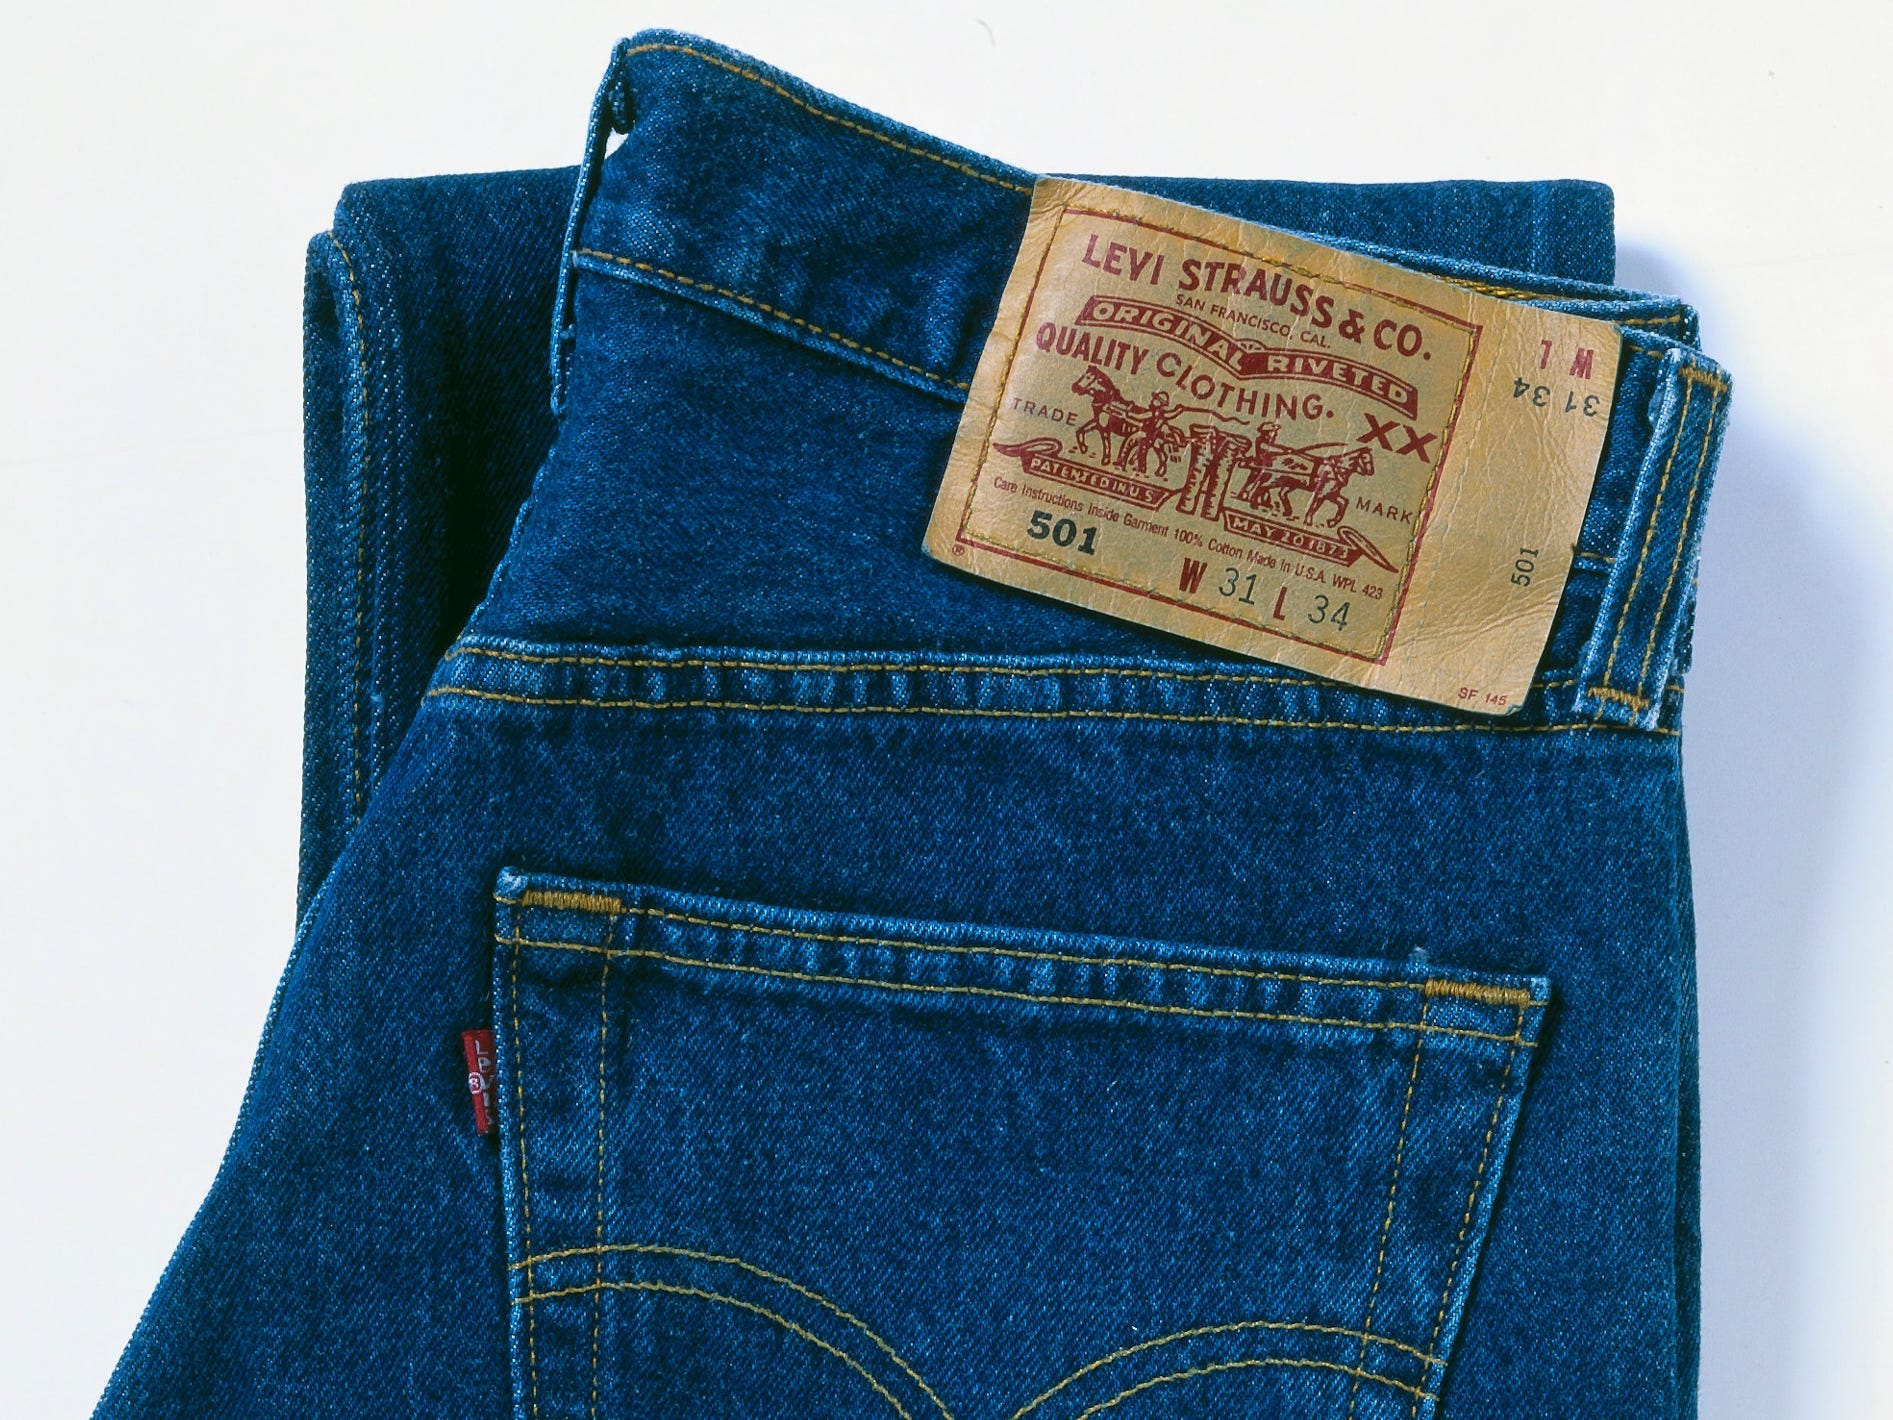 A contraband pair of Levi's were worth up to $500 on Germany's black market  during the Cold War because they were an icon of American culture